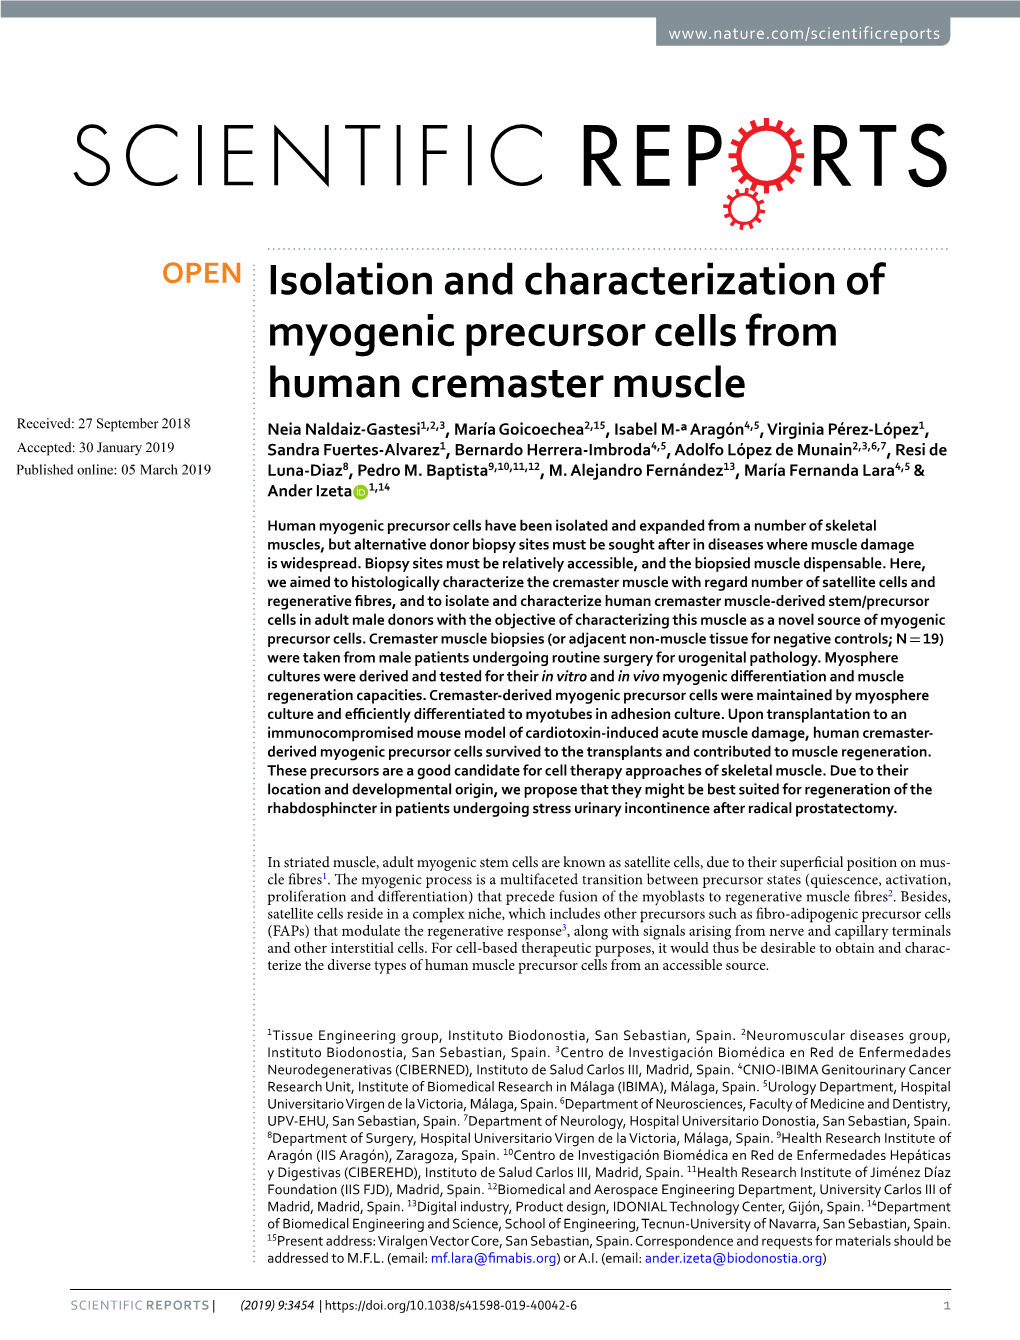 Isolation and Characterization of Myogenic Precursor Cells From